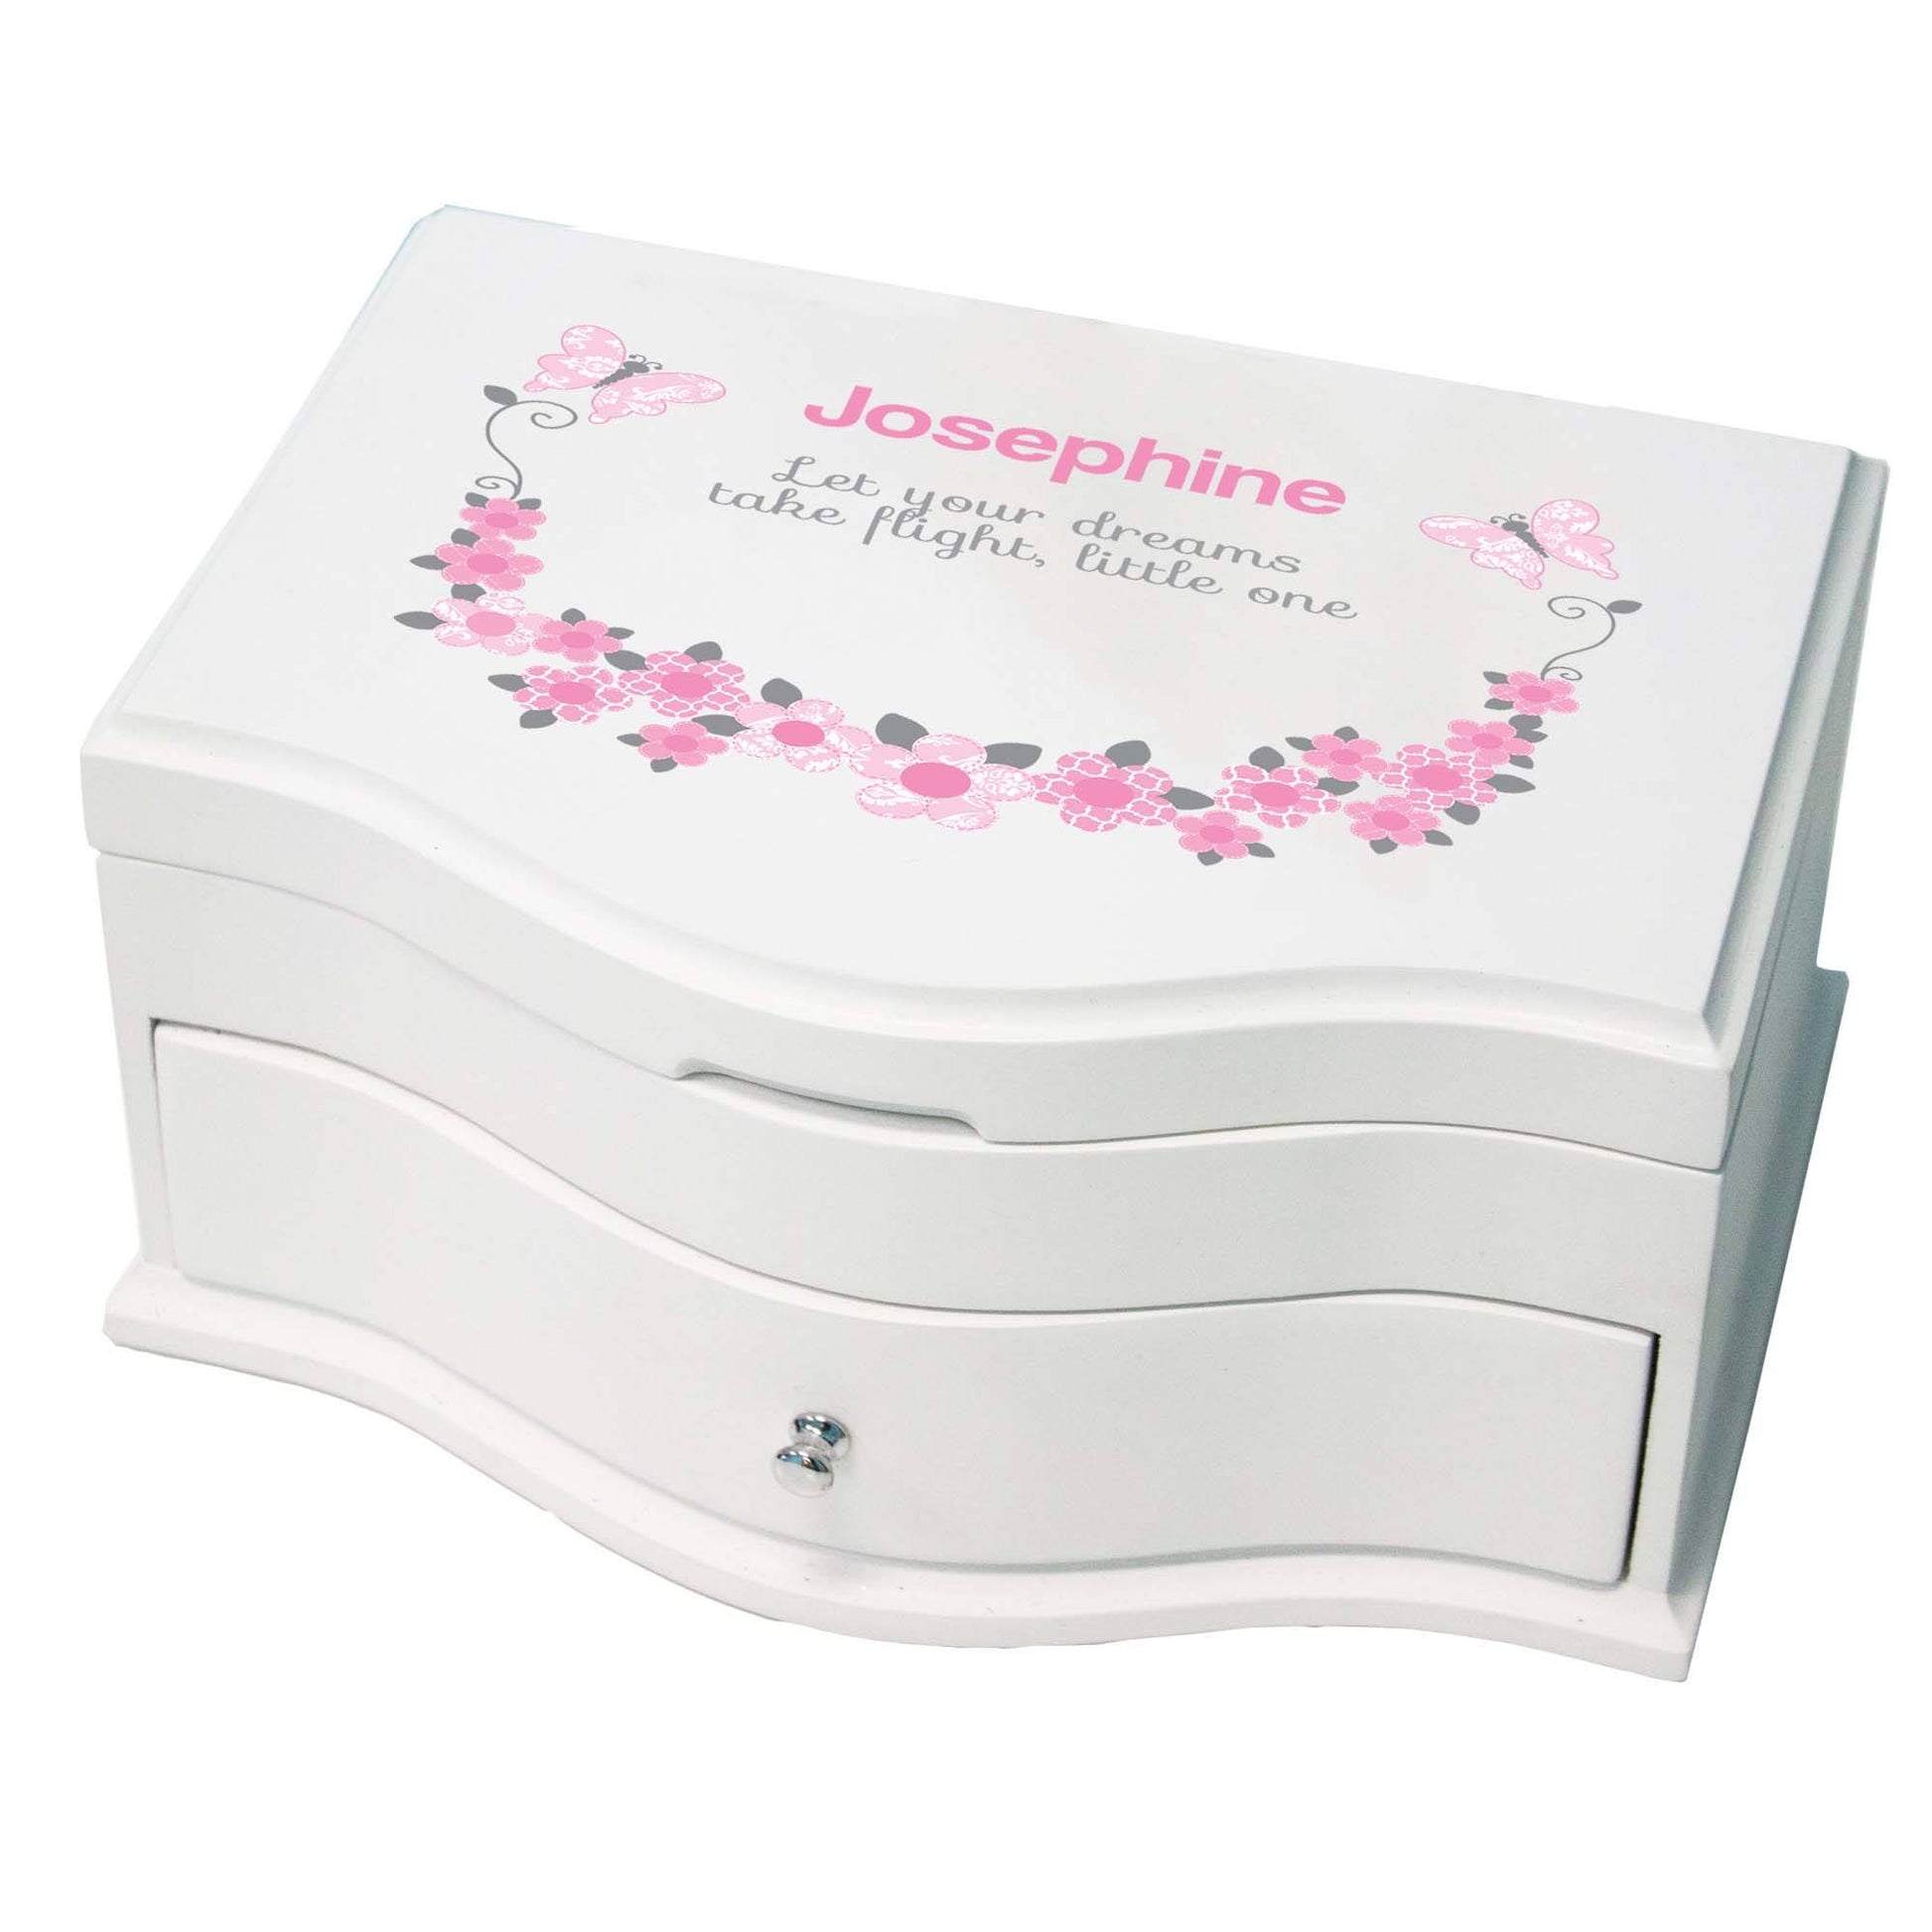 Princess Girls Jewelry Box with Pink and Gray Butterflies design